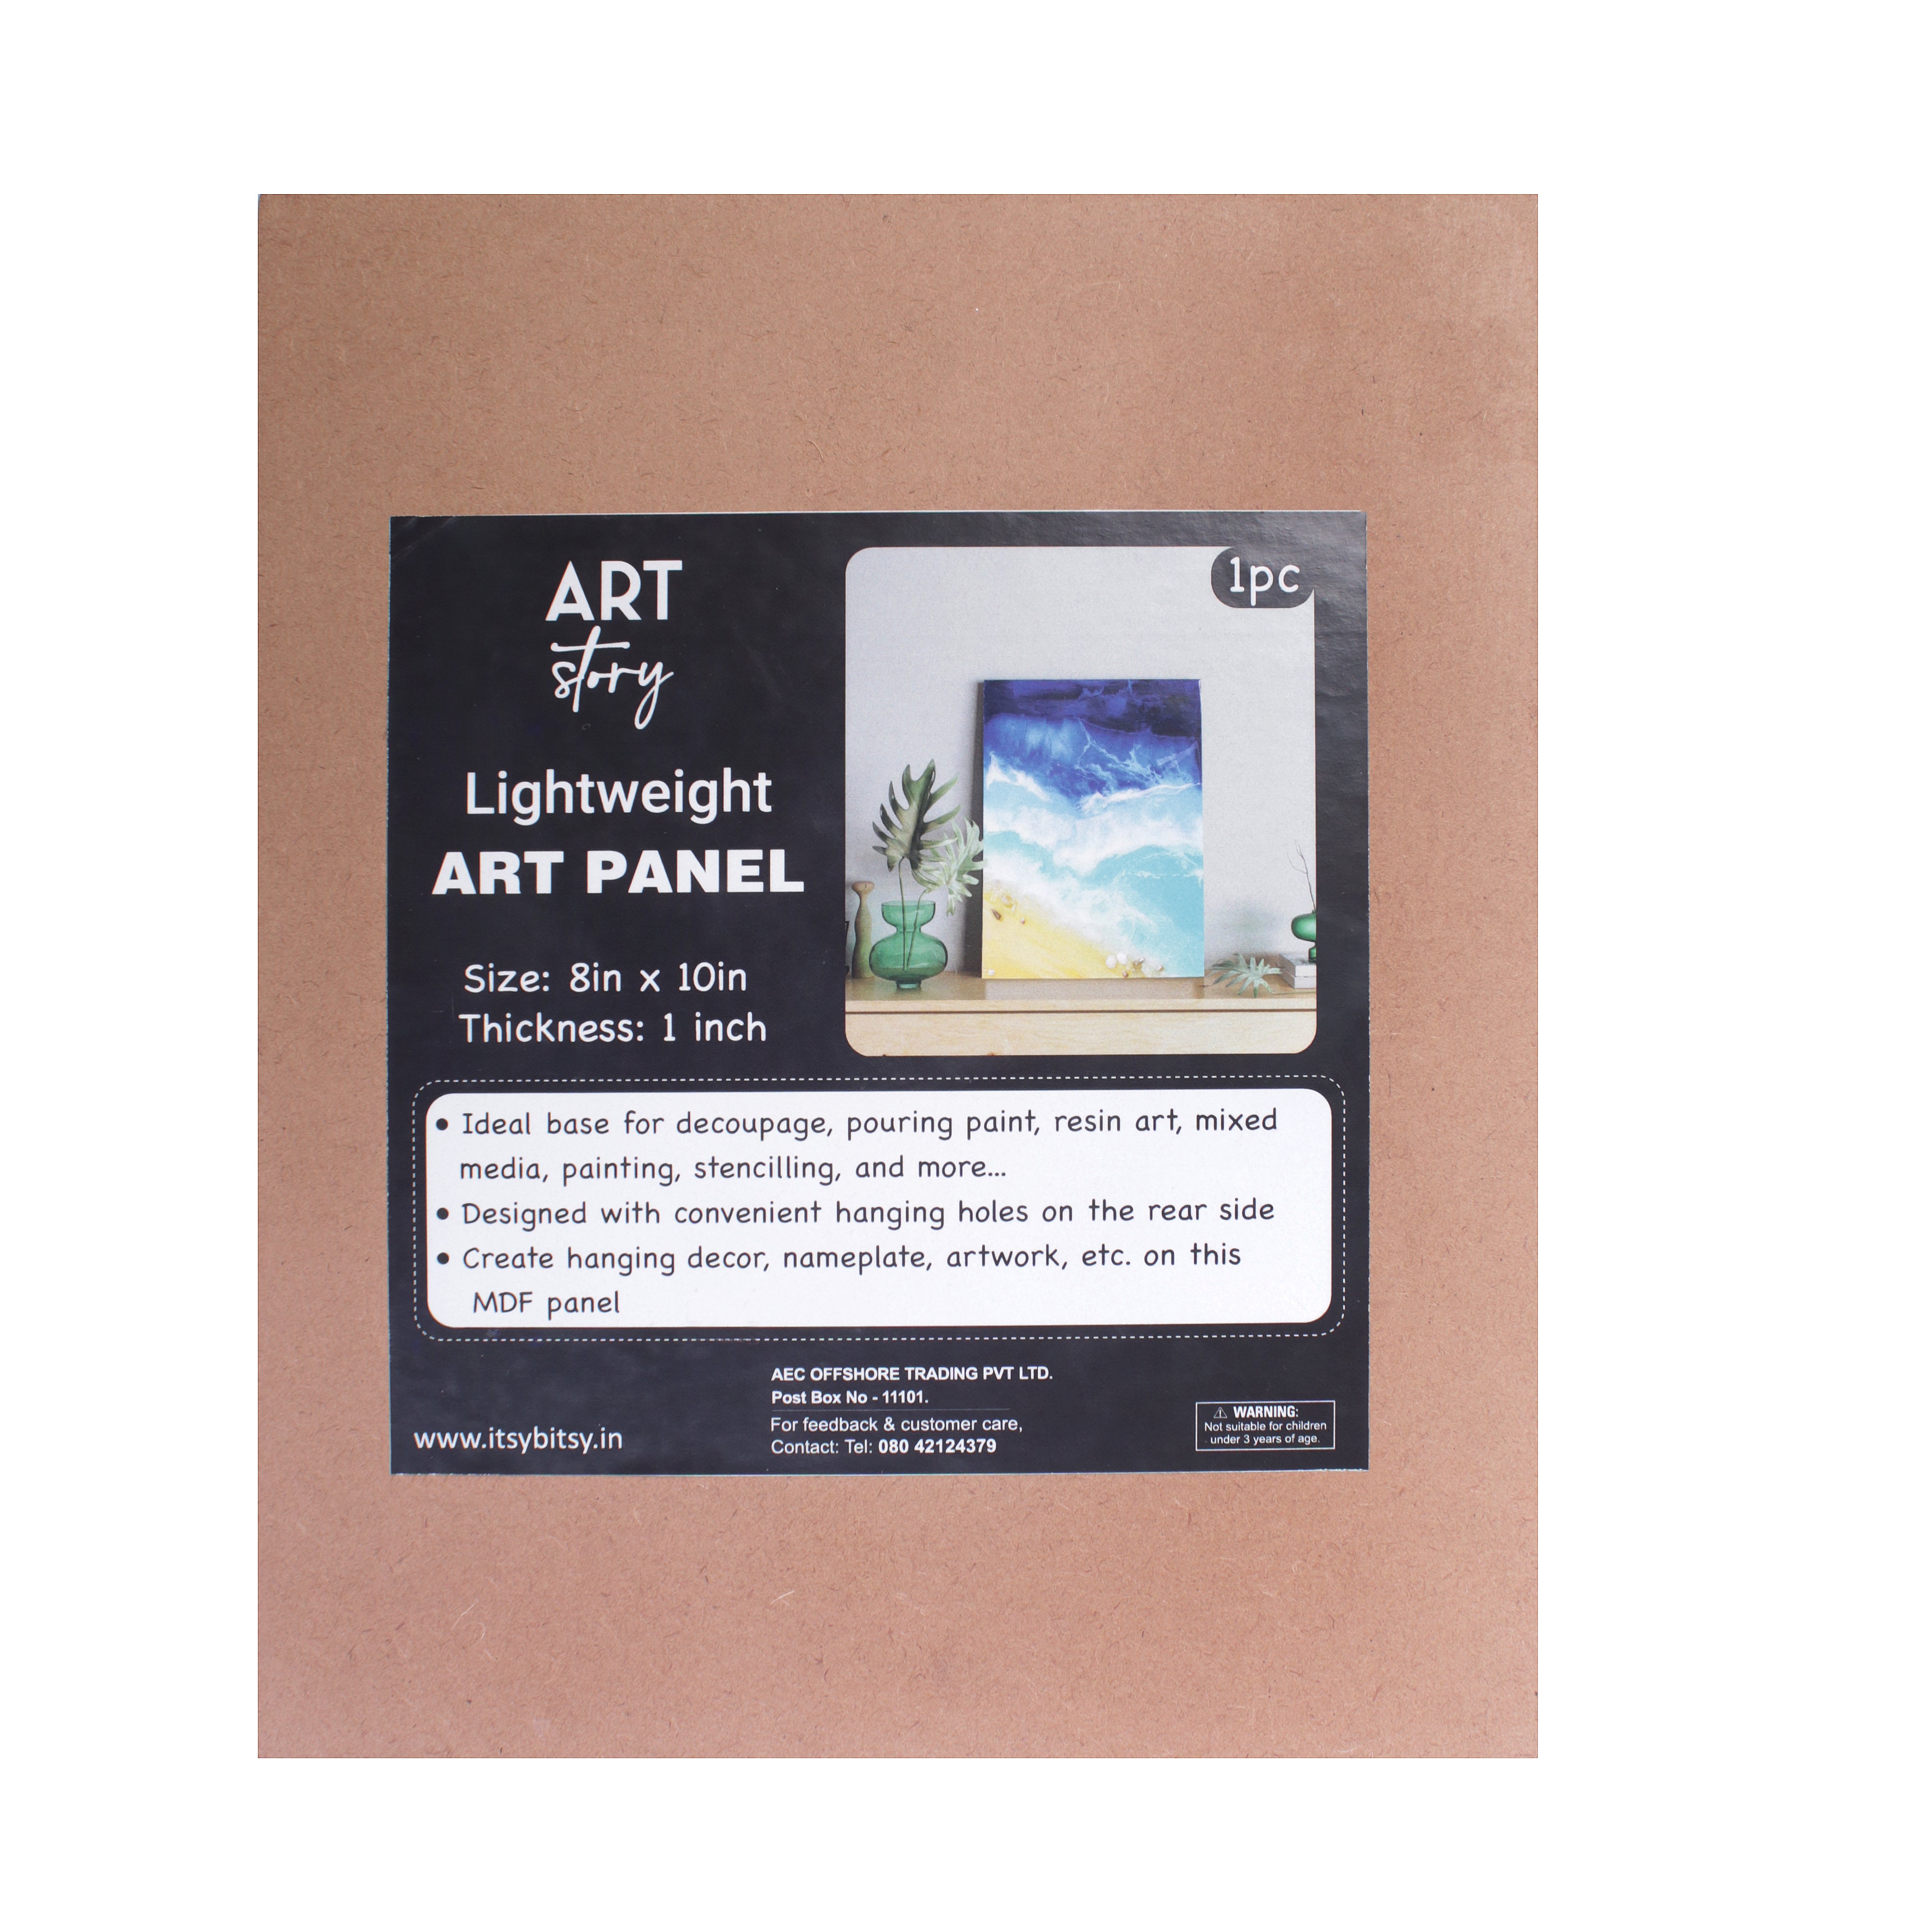 Mdf Light Weight Art Panel 8 X 10 X 1Inch 5.5Mm Thick 1Pc Sw Lb